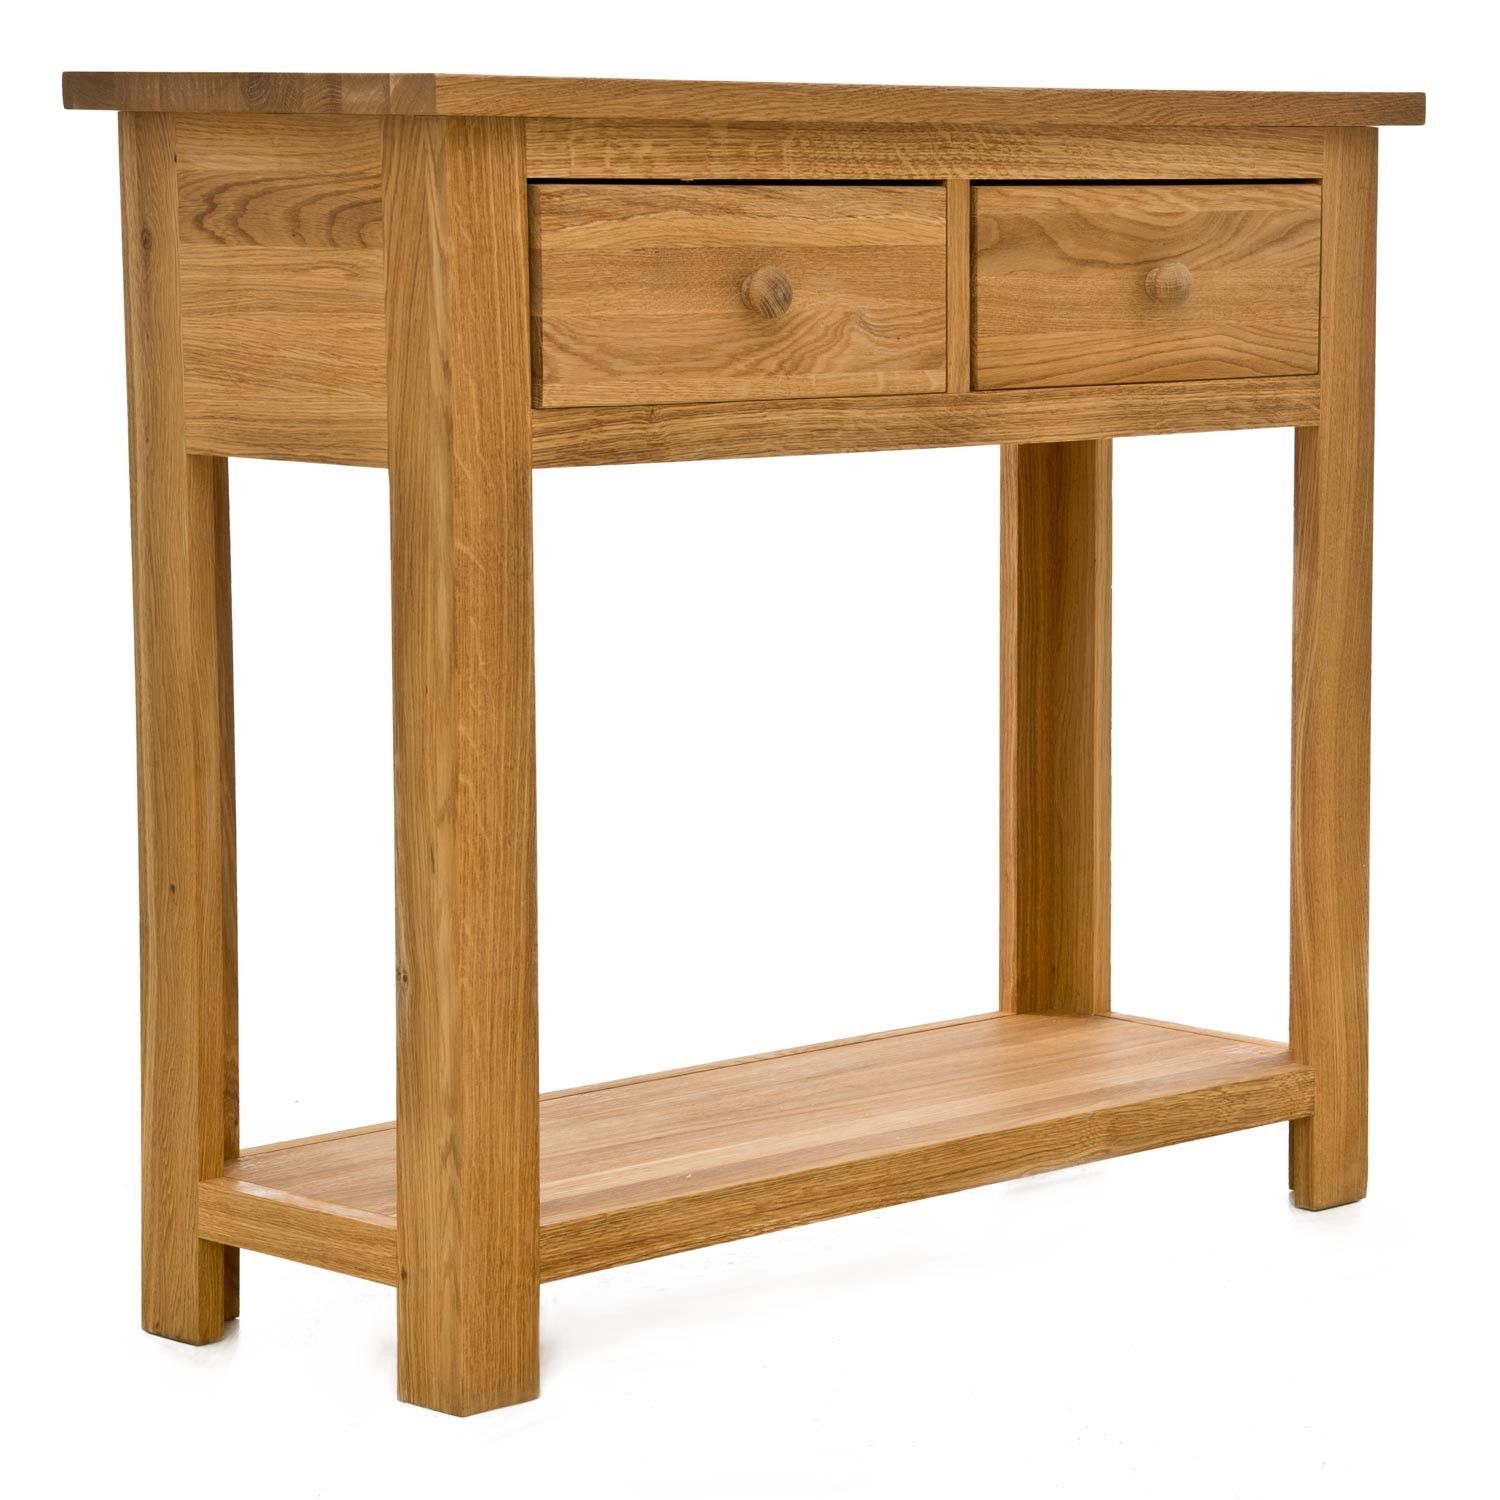 Casa Nevada 2 Drawer Console Table | Leekes Pertaining To 2 Drawer Oval Console Tables (View 6 of 20)